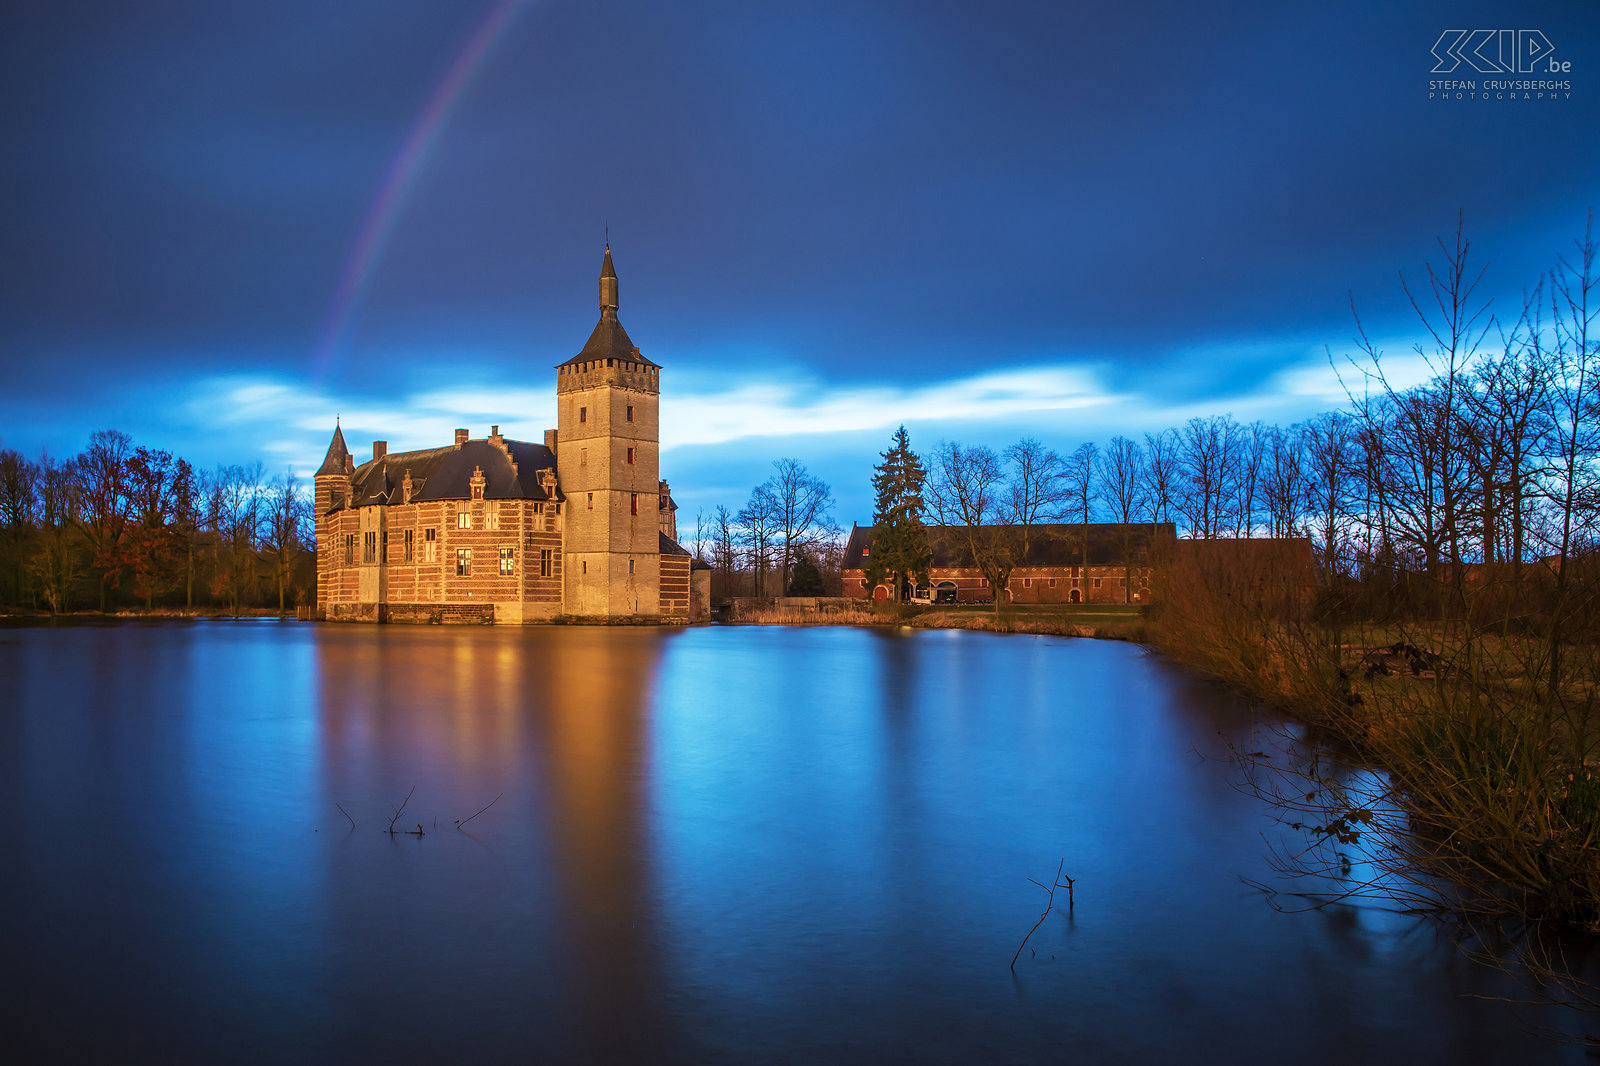 Sint-Pieters-Rode - Castle of Horst with rainbow just before sunset The castle and the chapel of Horst are photogenic landmarks near my new home. So in recent months I went out to photograph them several times, mostly in the evening and at night or when there were special weather conditions. I tried to create some unique photos of these monuments that differ from the images that already have been captured by many other people.<br />
 <br />
The castle of Horst is located in the village of Sint-Pieters-Rode (Holsbeek, Belgium). The castle was built in the mid-14th century and is still quite authentic. The former living rooms, made of brick and sandstone, are mostly from the 16th and 17th centuries. After a heavy rainshower a rainbow appeared above the castle and the last light of the sun gave the castle a beautiful orange-yellow glow. Stefan Cruysberghs